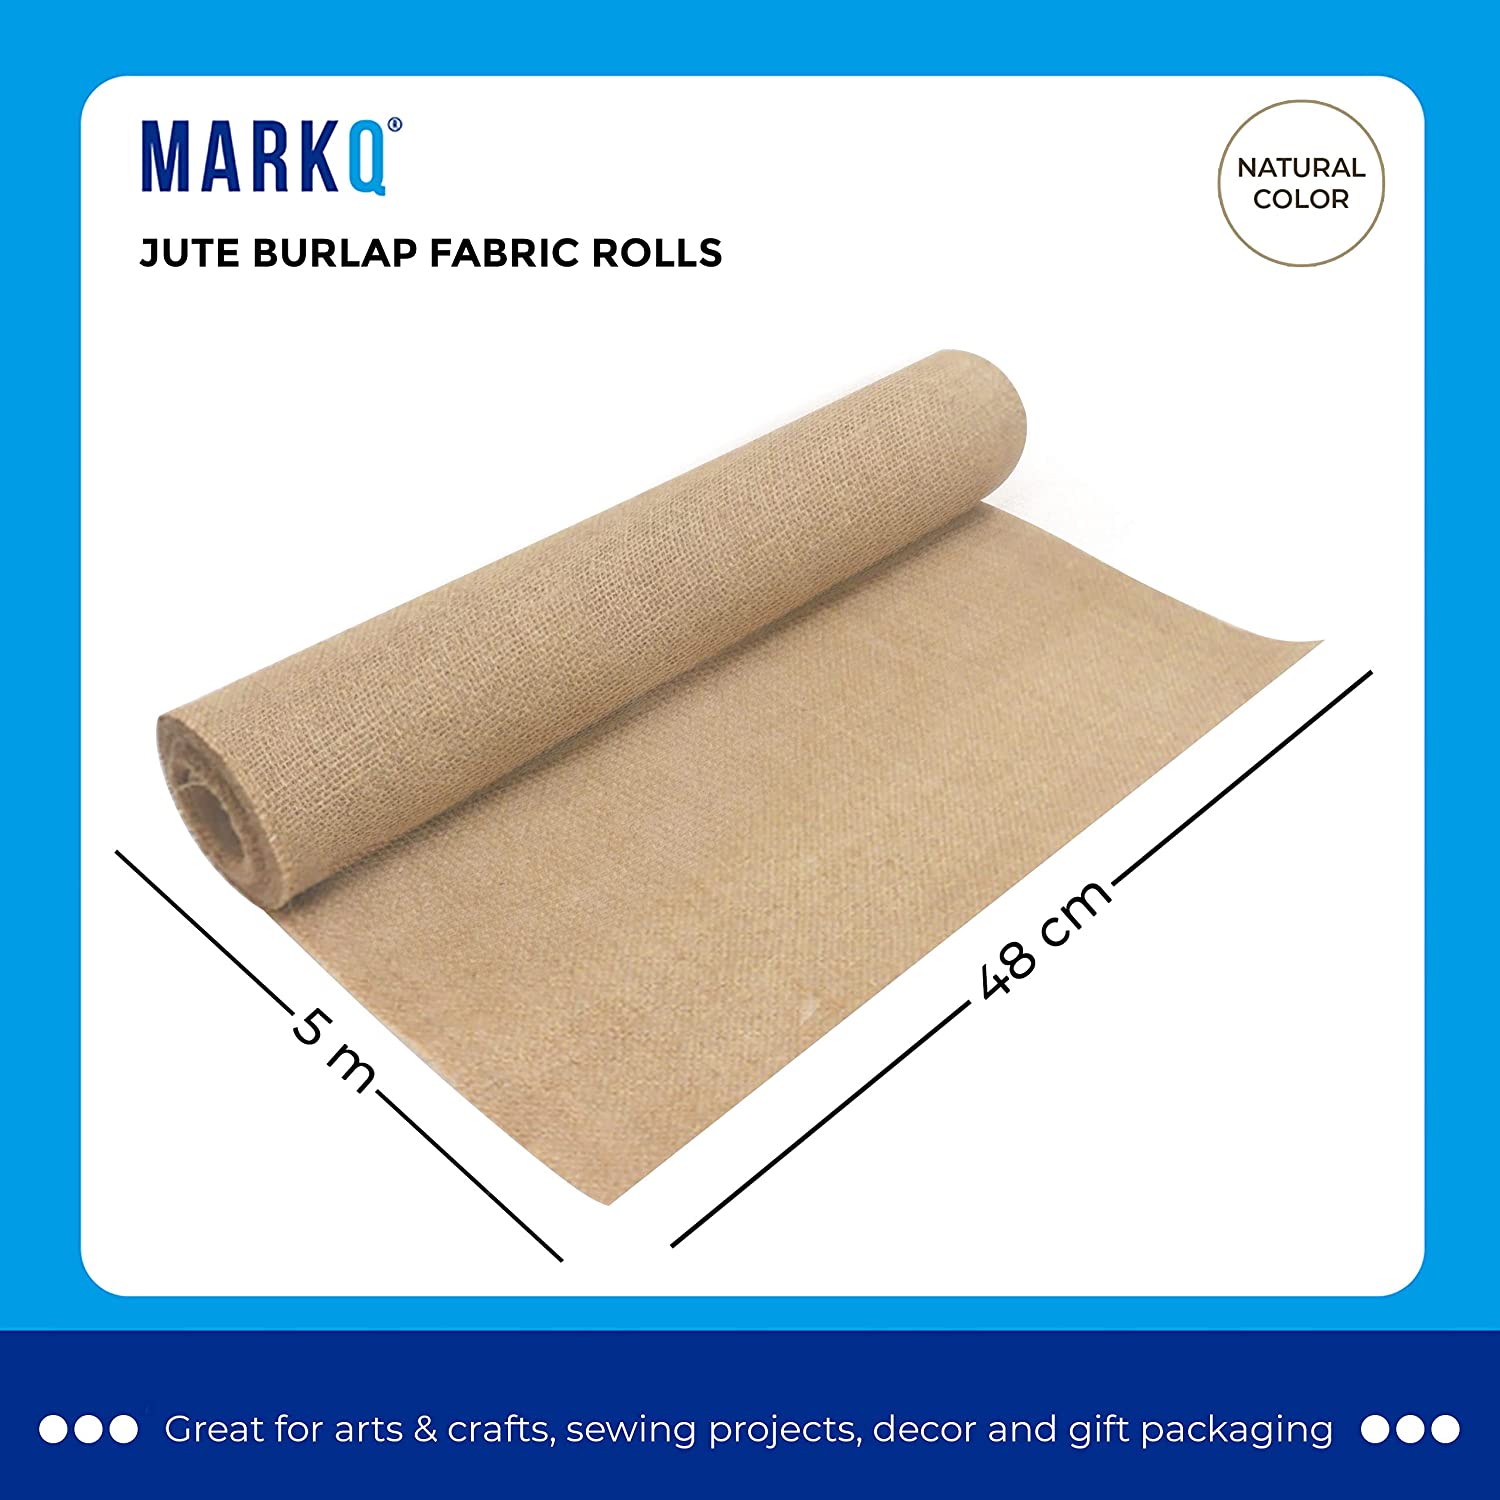 Markq Burlap Fabric Roll, 48 cm x 5 meter Jute Hessian Cloth Table Runner for Crafts, Christmas Kitchen Wedding Party Decor Table Cloth (1 Roll)